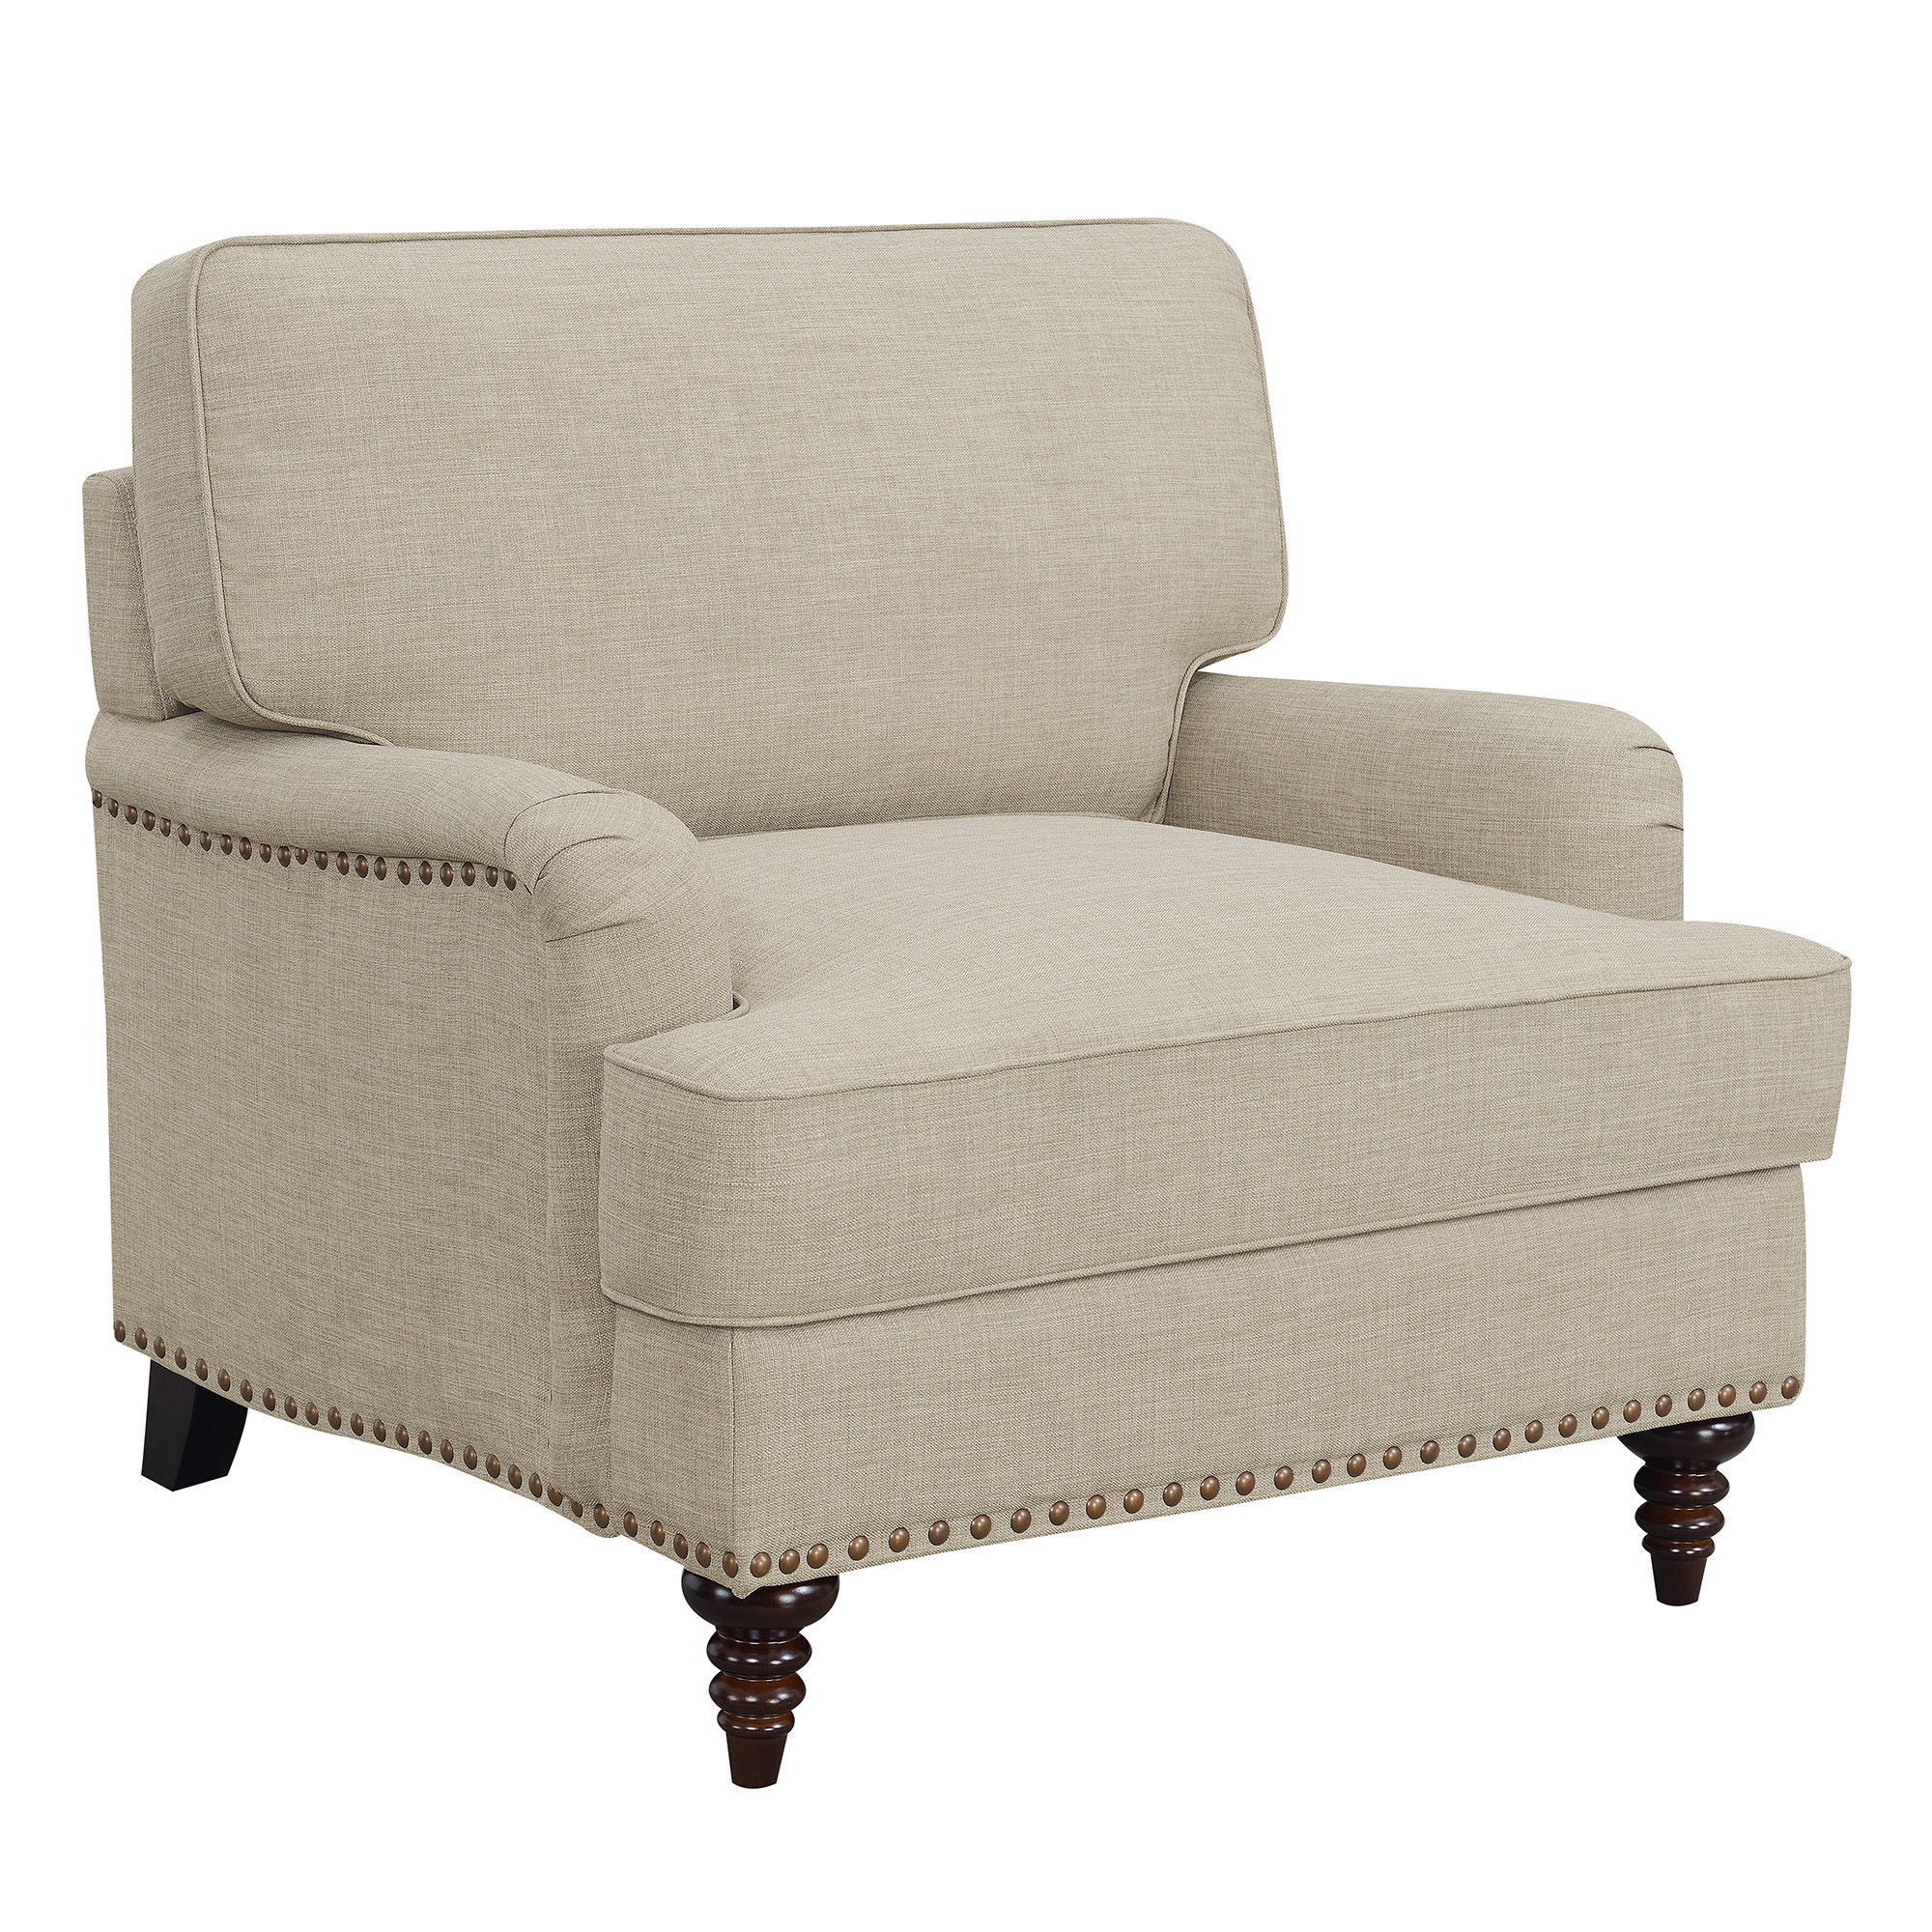 Abby Chair in Heirloom Natural / Linen